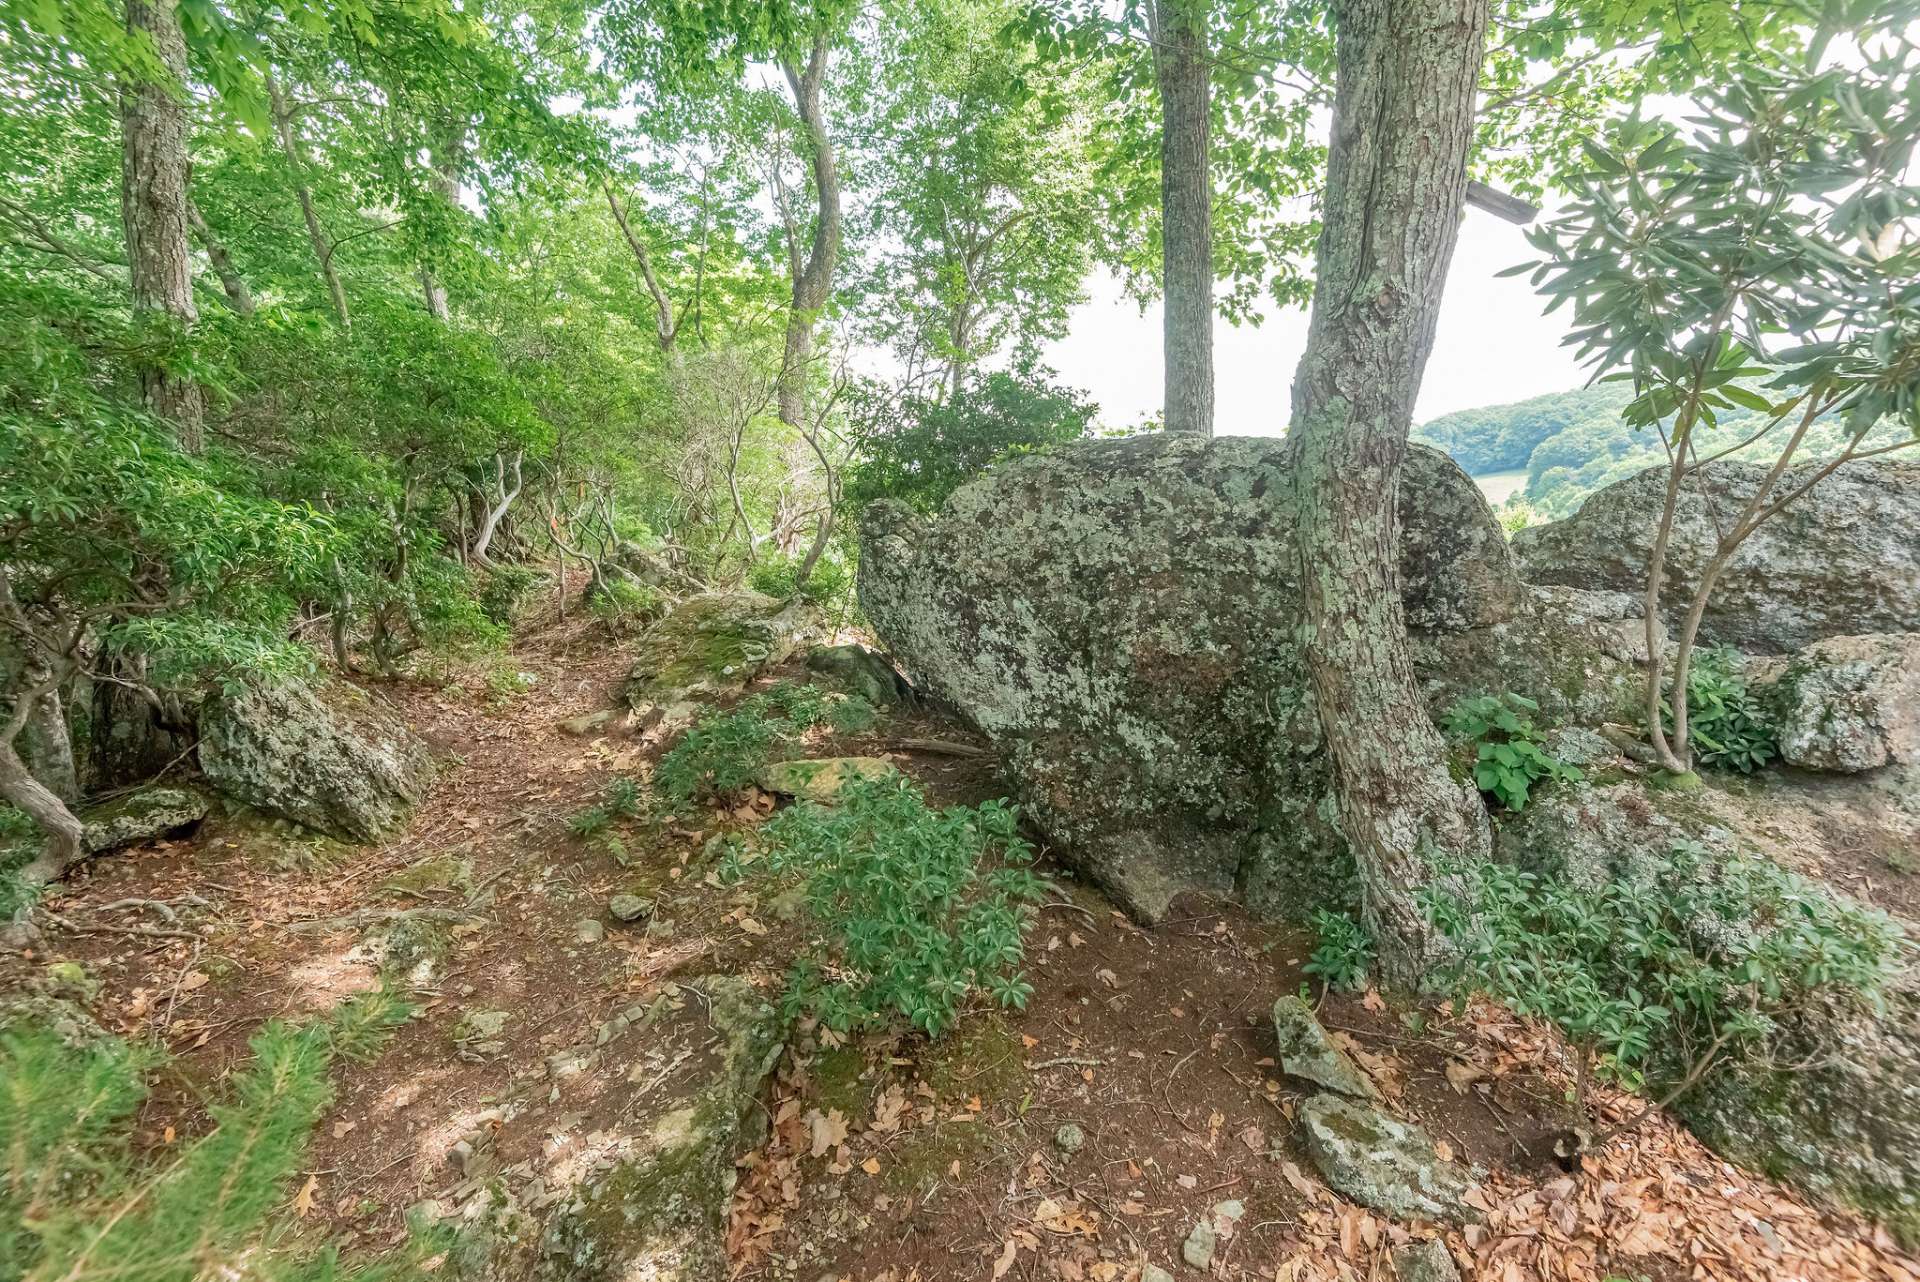 Property offers a short nature trail around the magnificent boulders.